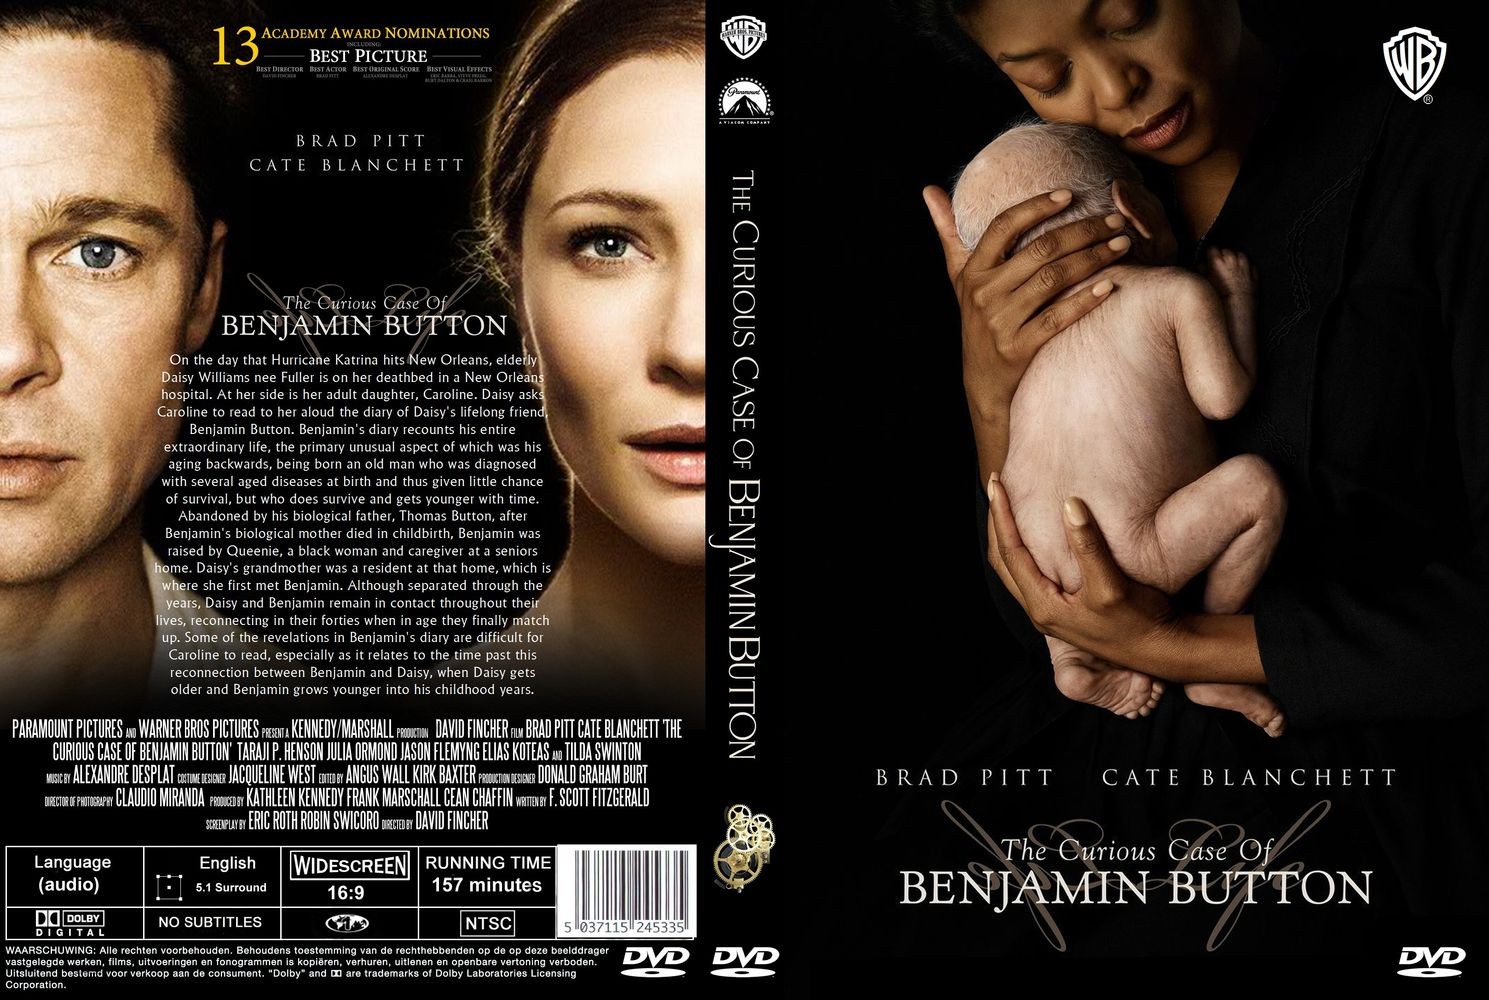 The Curious Case of Benjamin Button v2 imdb-dl5 - back.